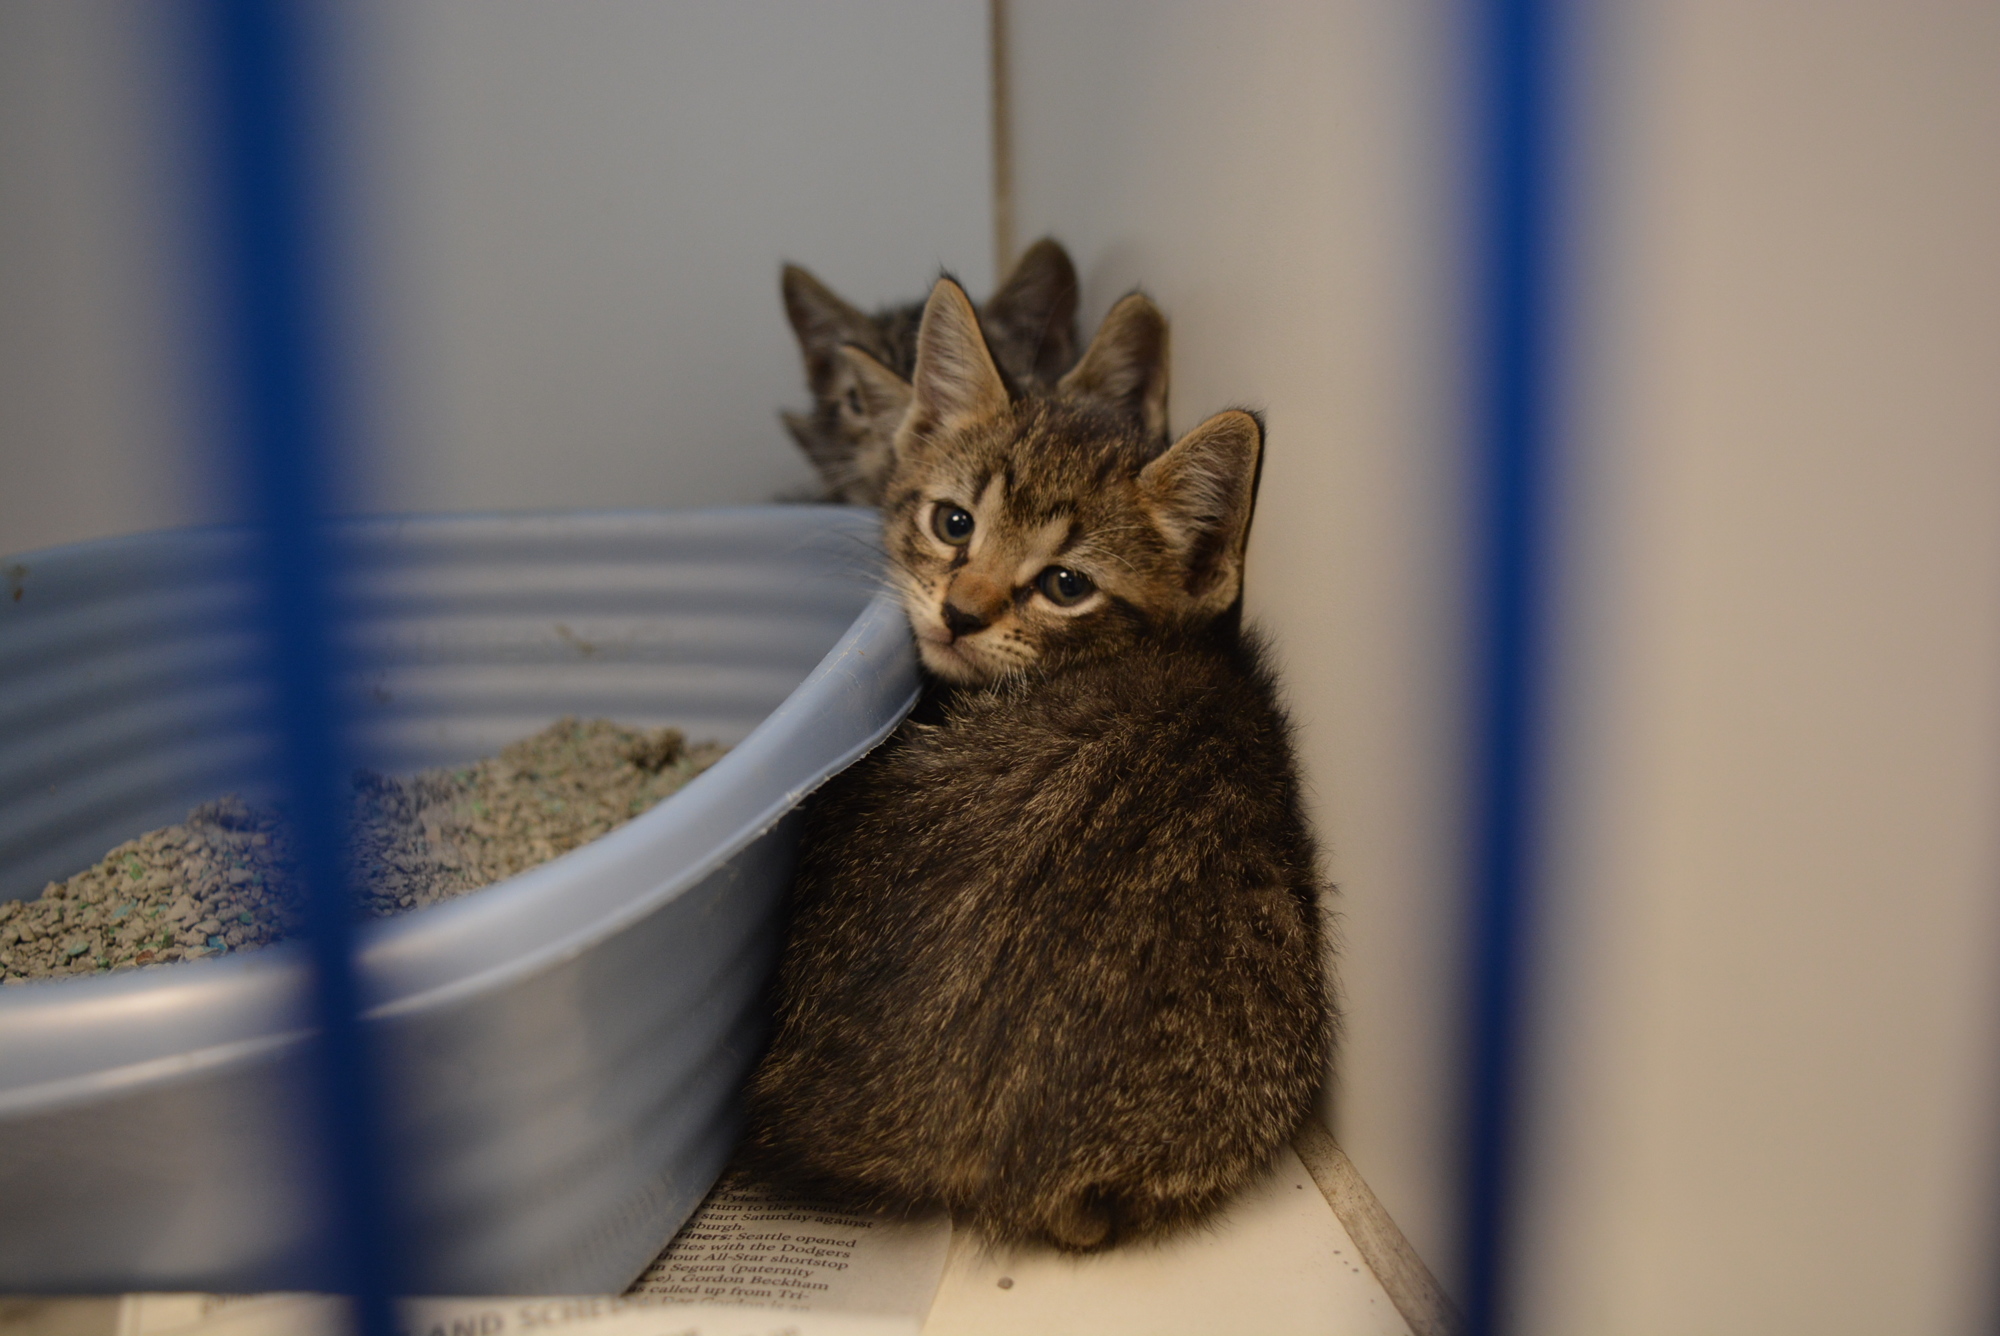 Animal Services has more kittens than normal because it is cat breeding season. The kittens have been relocated temporarily as the room in which they normally are held is remediated because of mold.